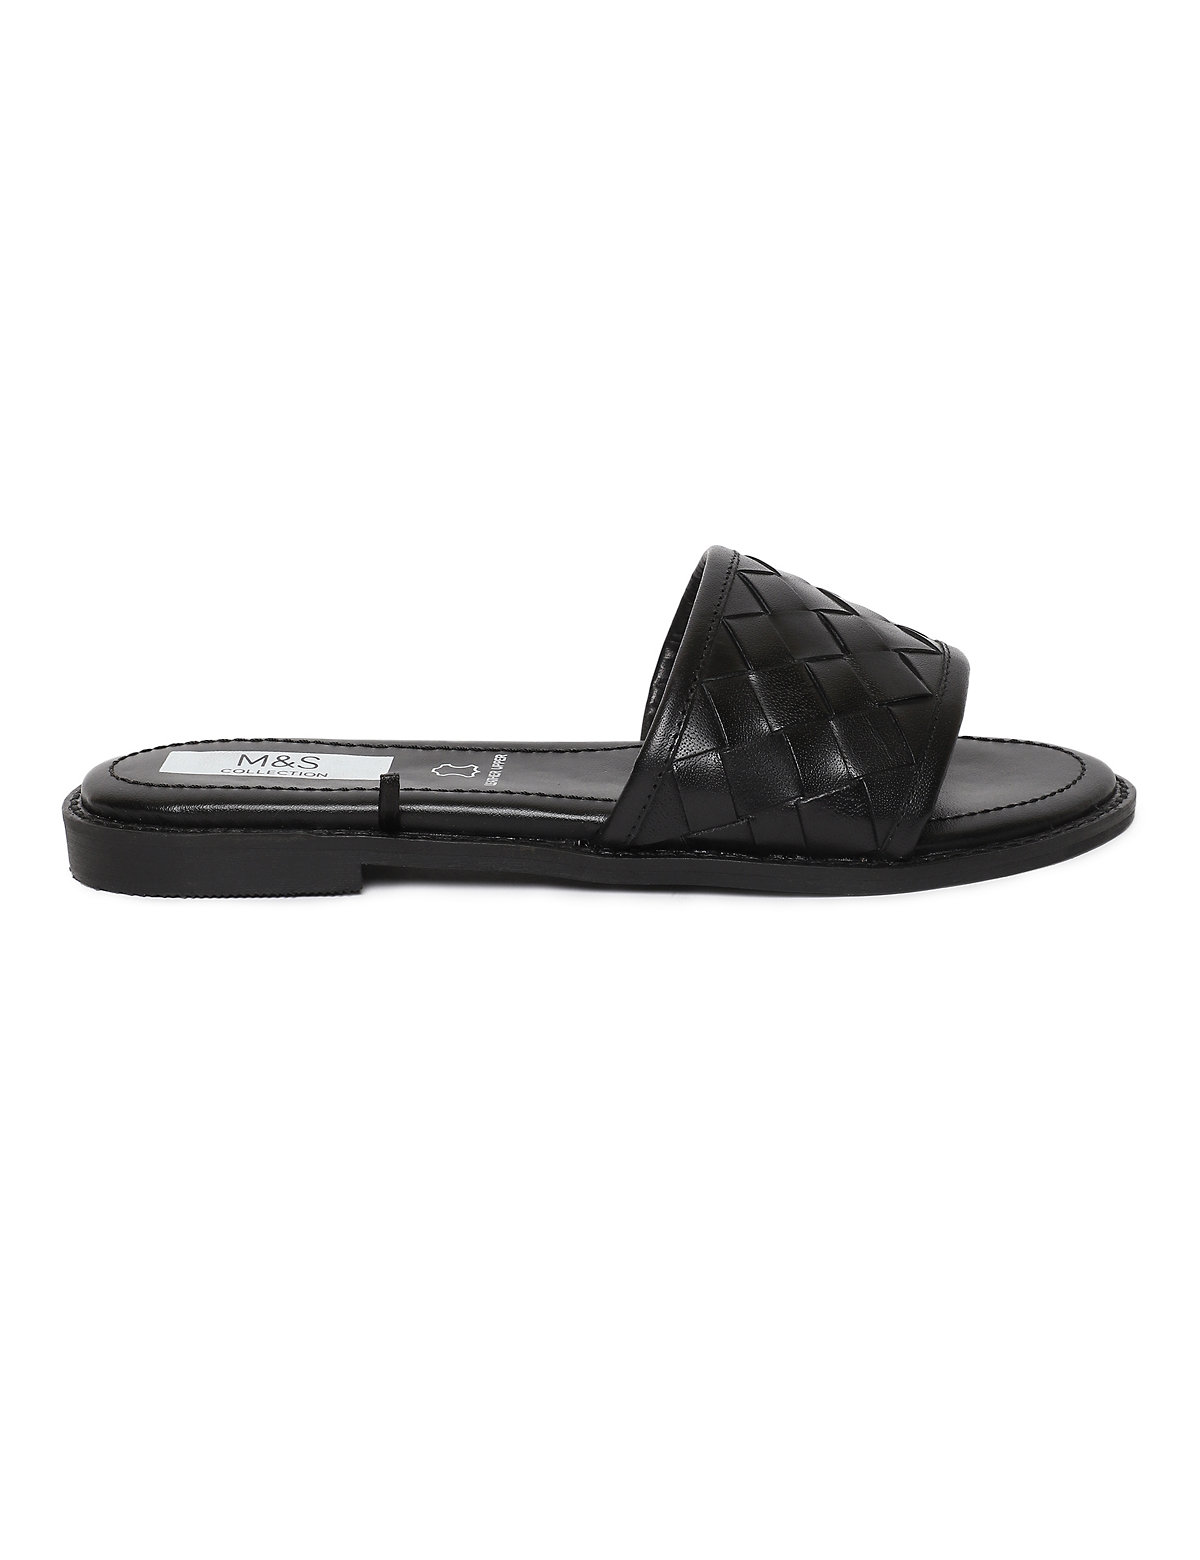 Pure Leather Plain Slippers